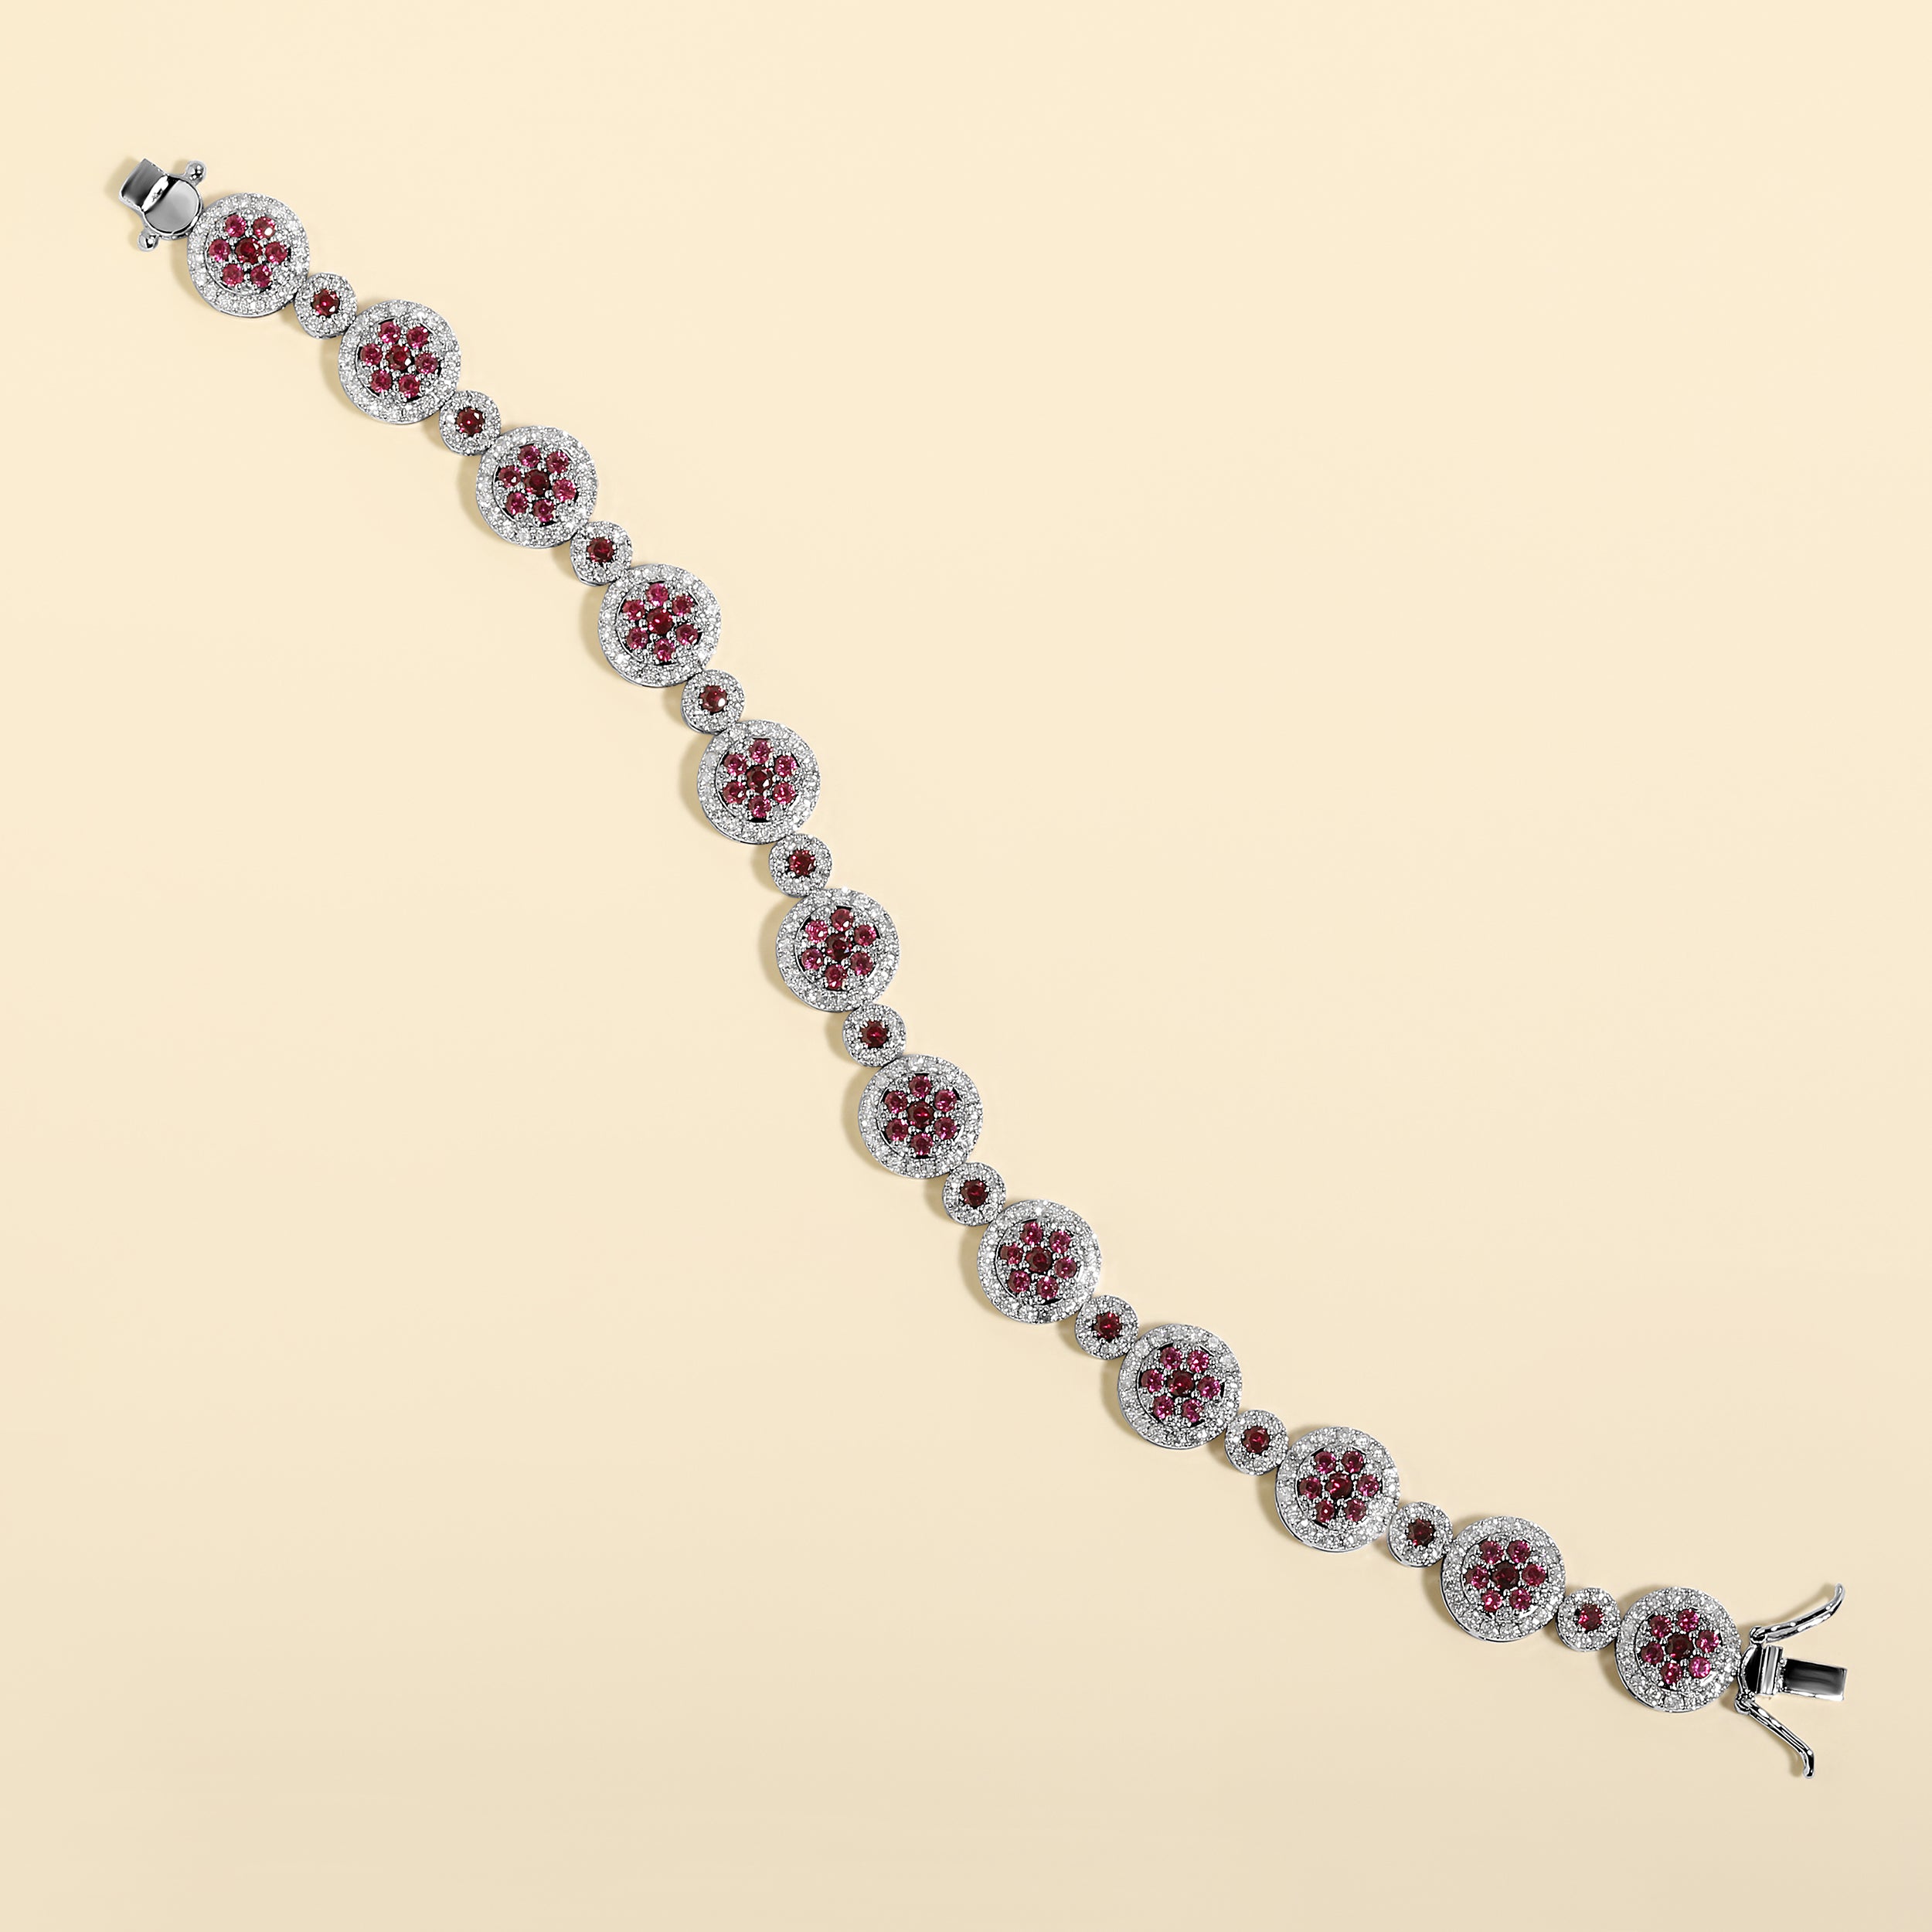 Certified 14K Gold 14.7ct Natural Diamond w/ Simulated Ruby Round Tennis White Bracelet